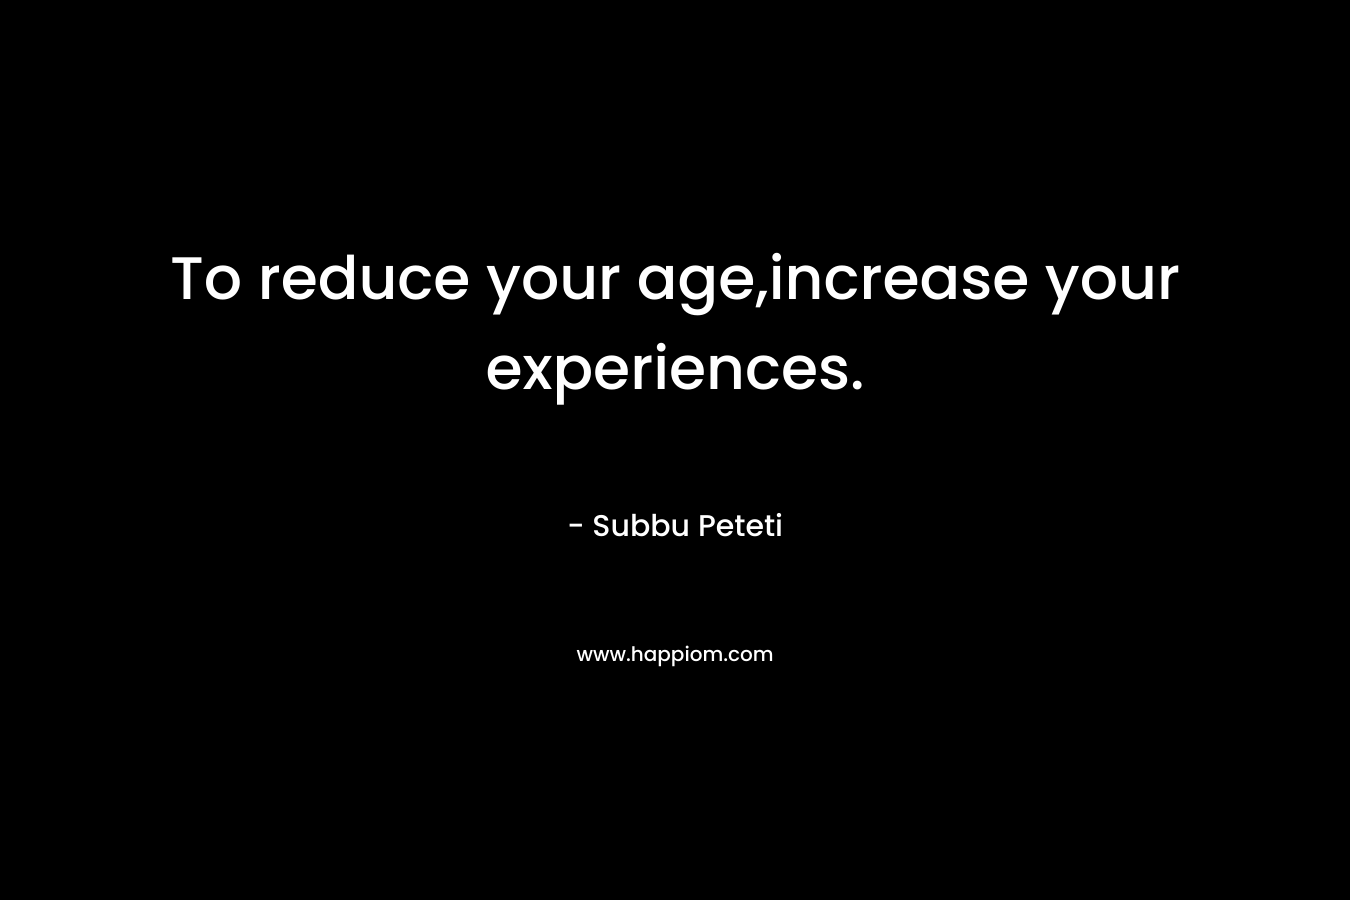 To reduce your age,increase your experiences.